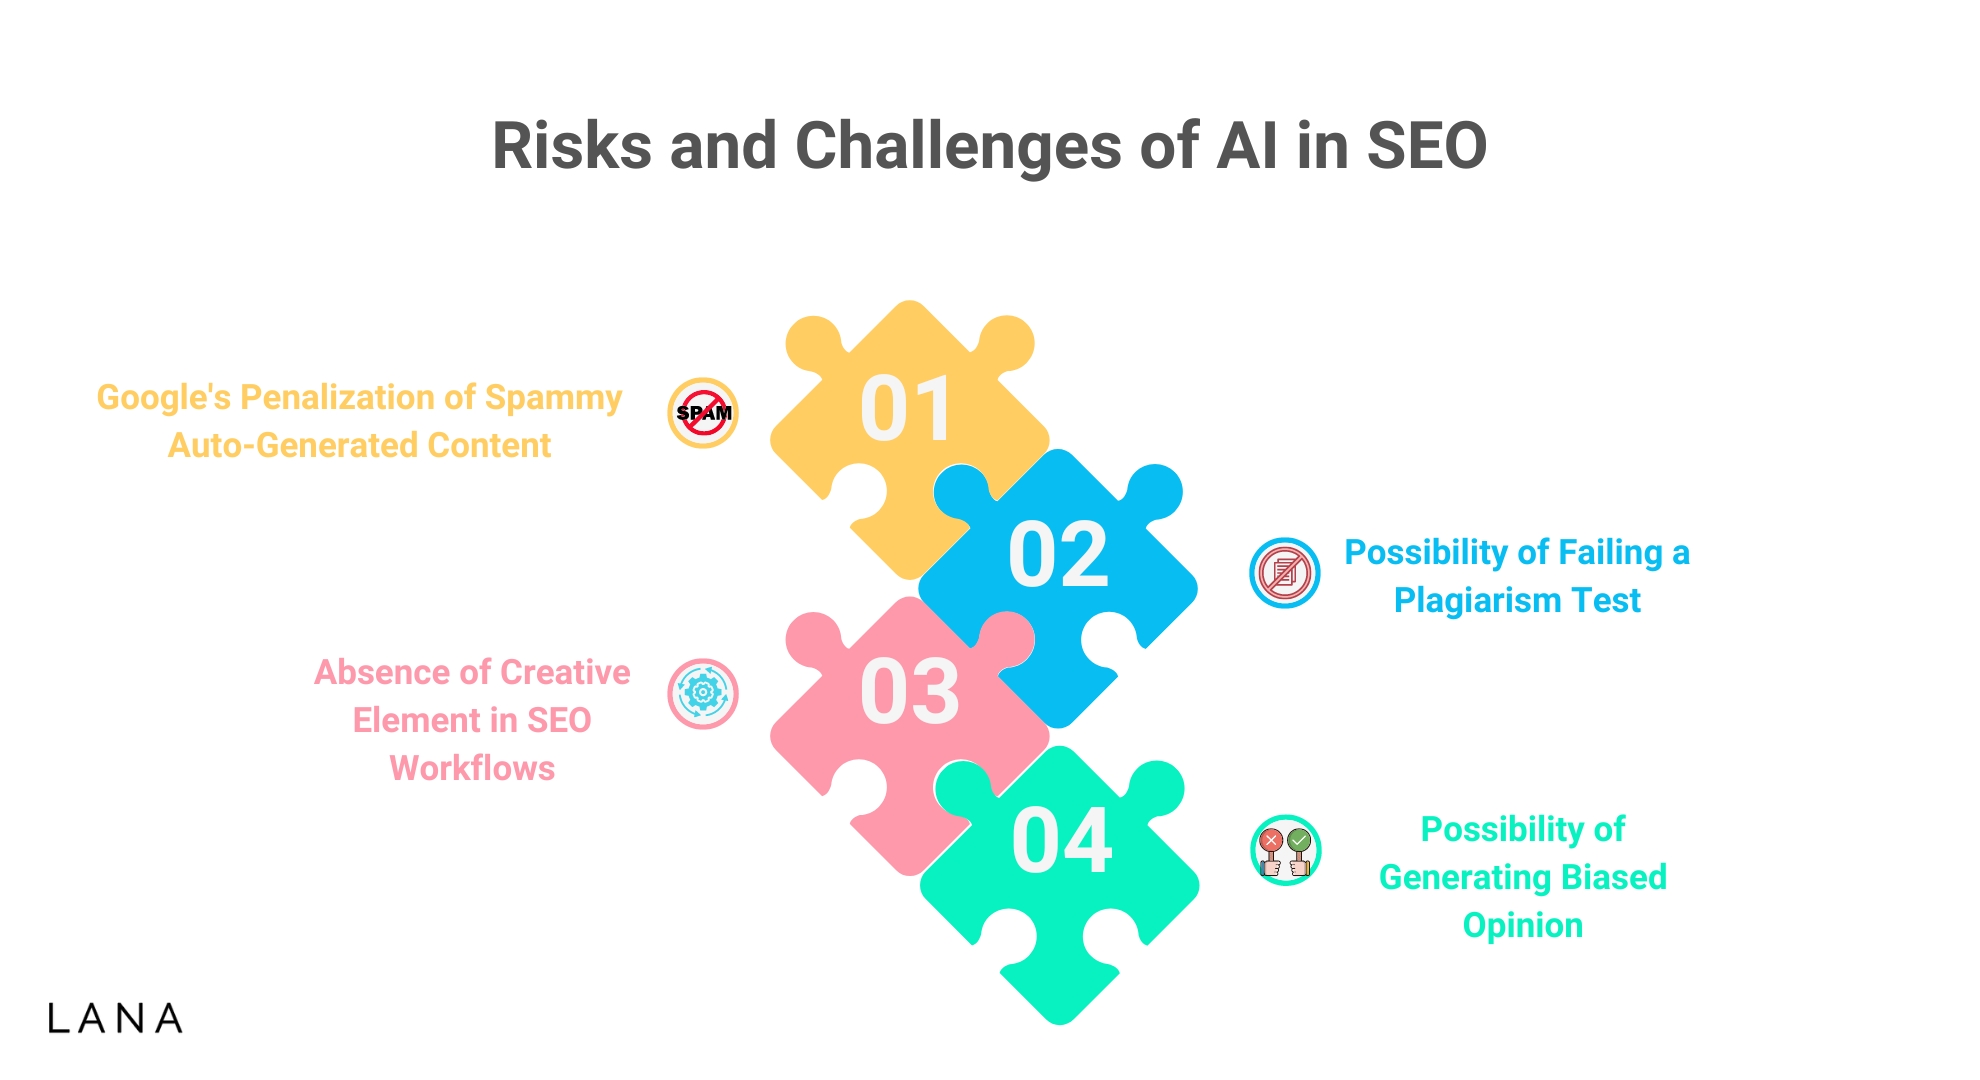 Risks and Challenges of AI in SEO